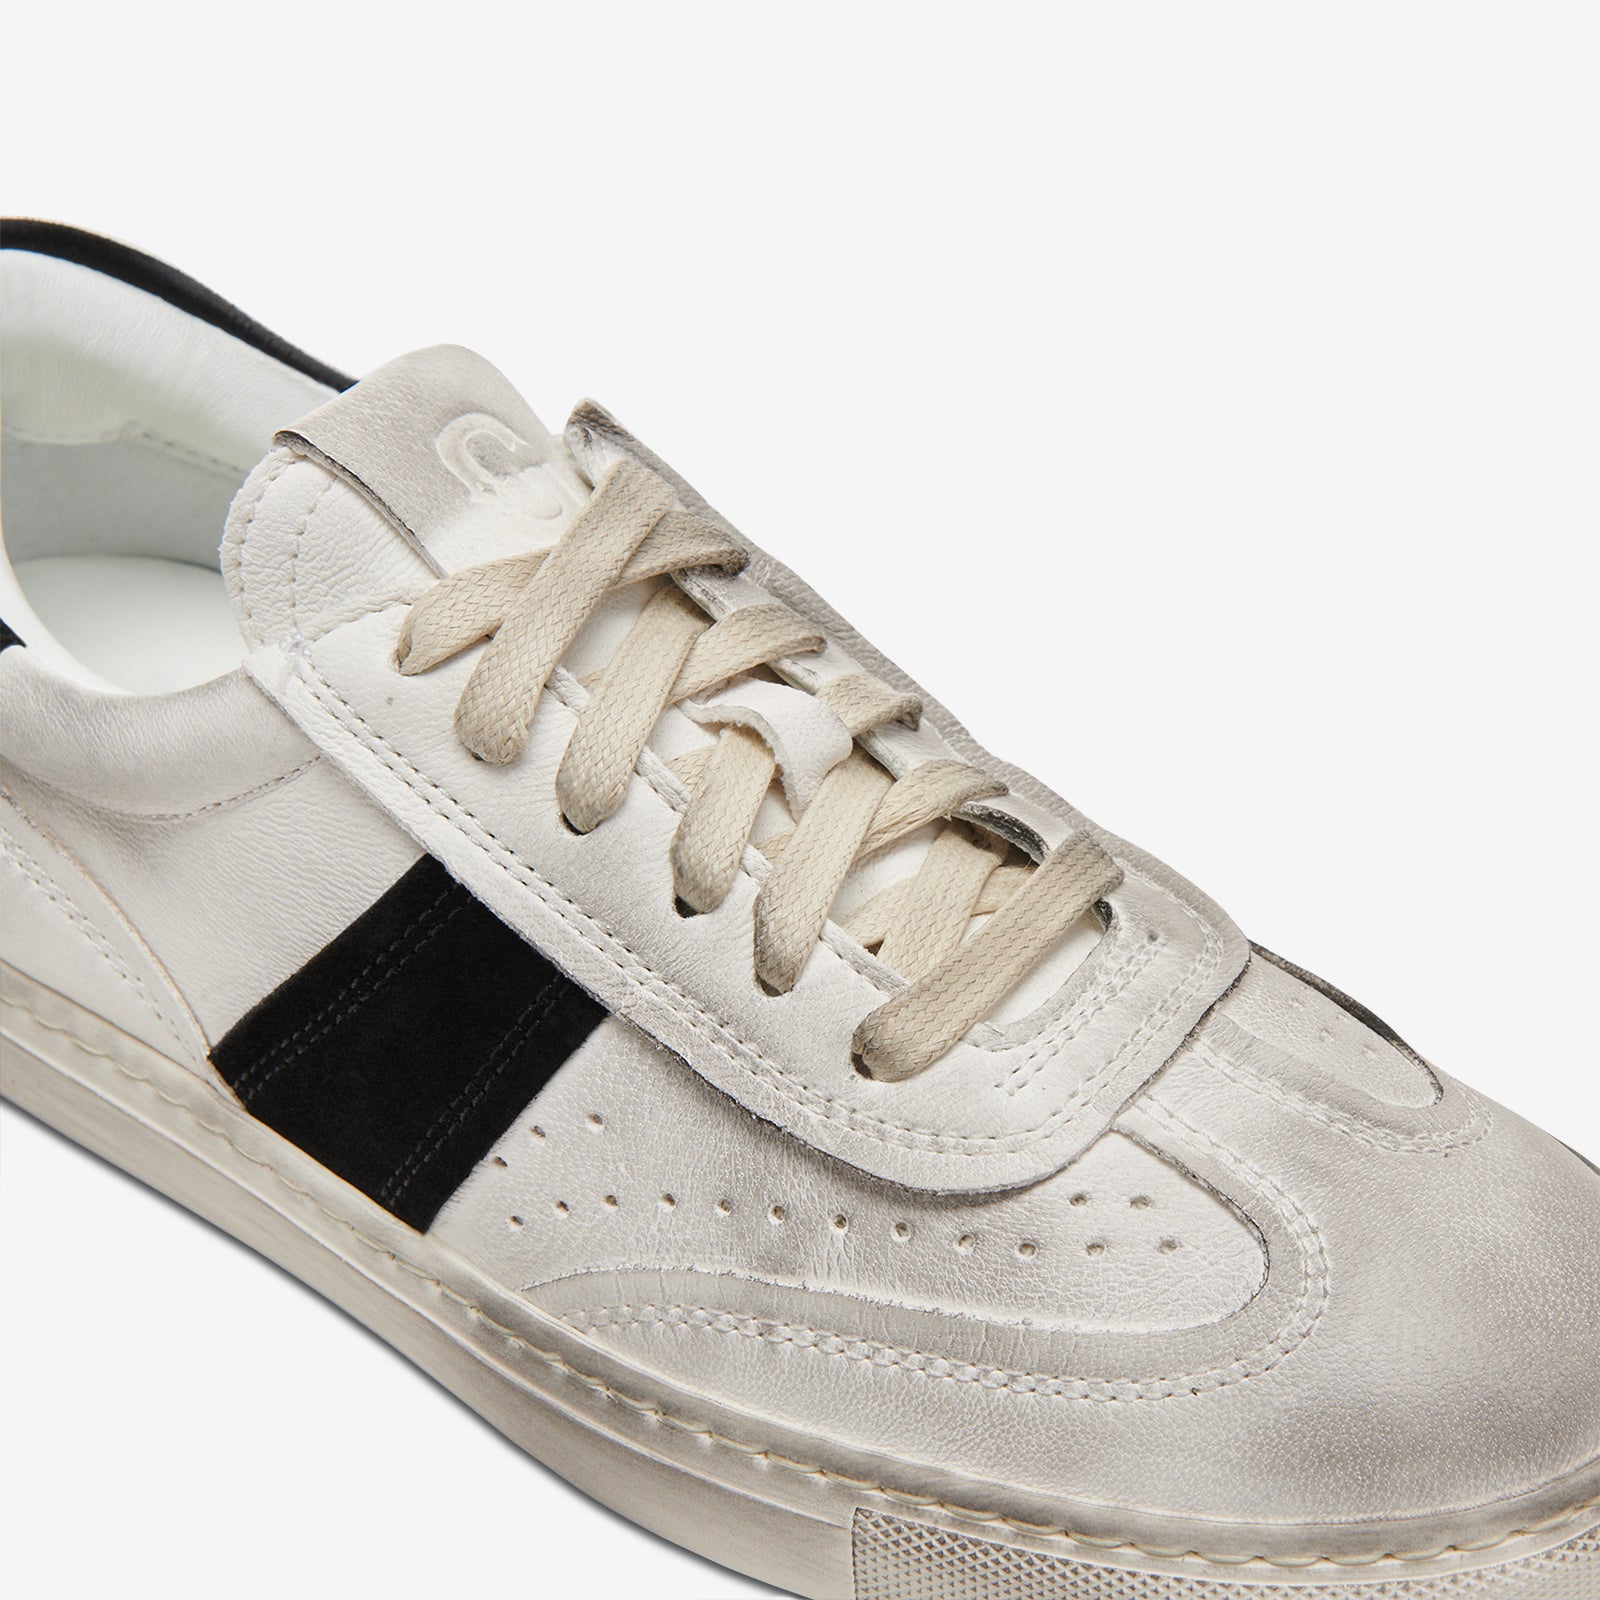 The Charlie Distressed - White/Black